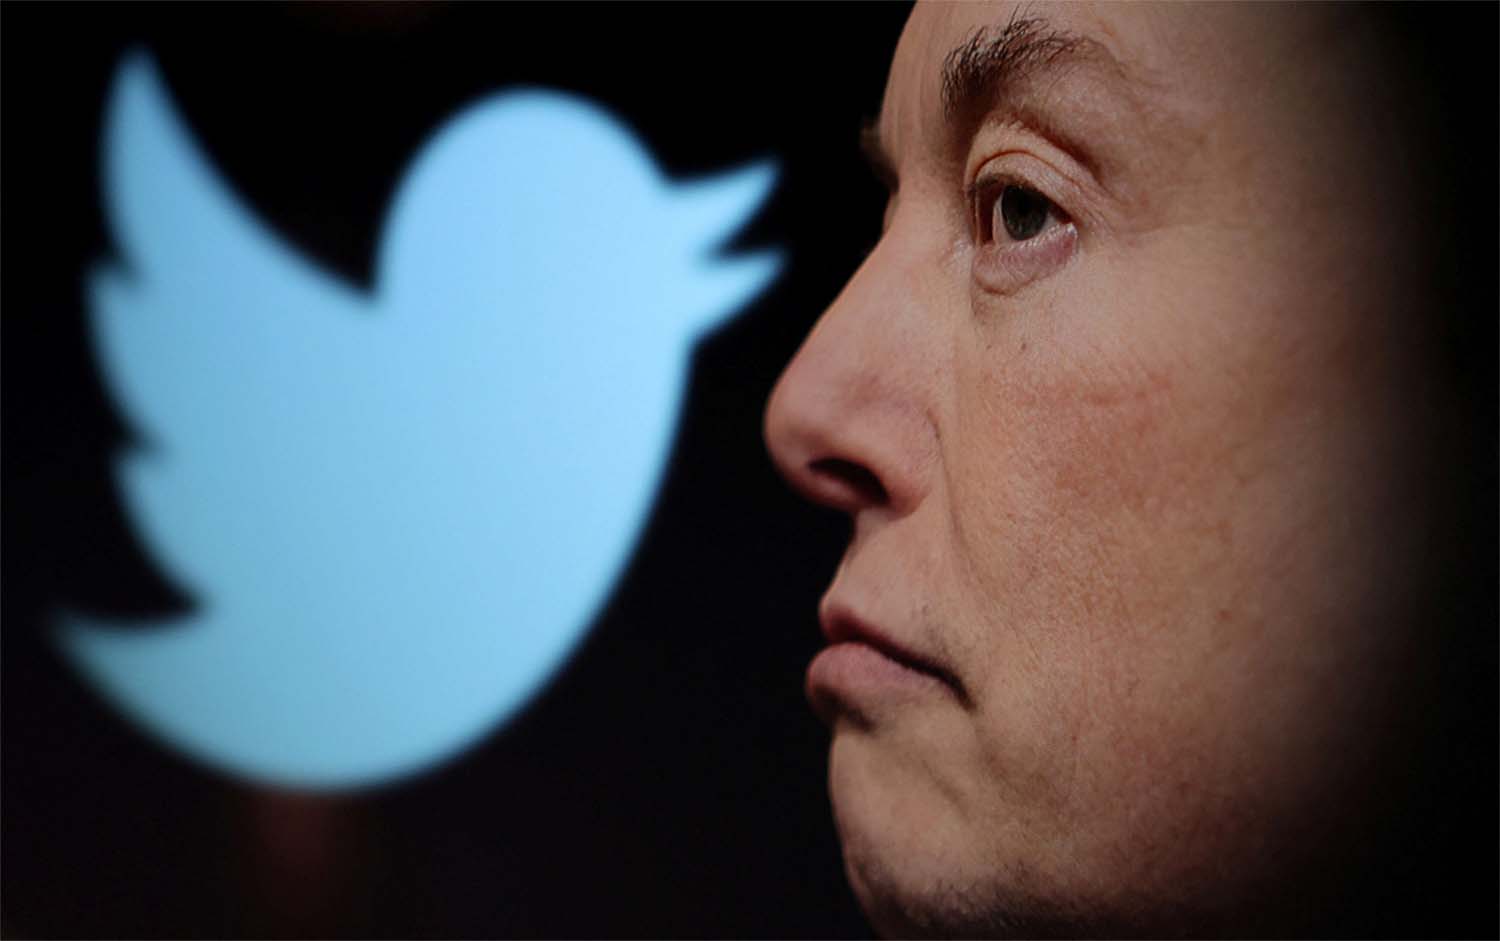 Elon Musk has taken control of Twitter after a protracted legal battle and months of uncertainty